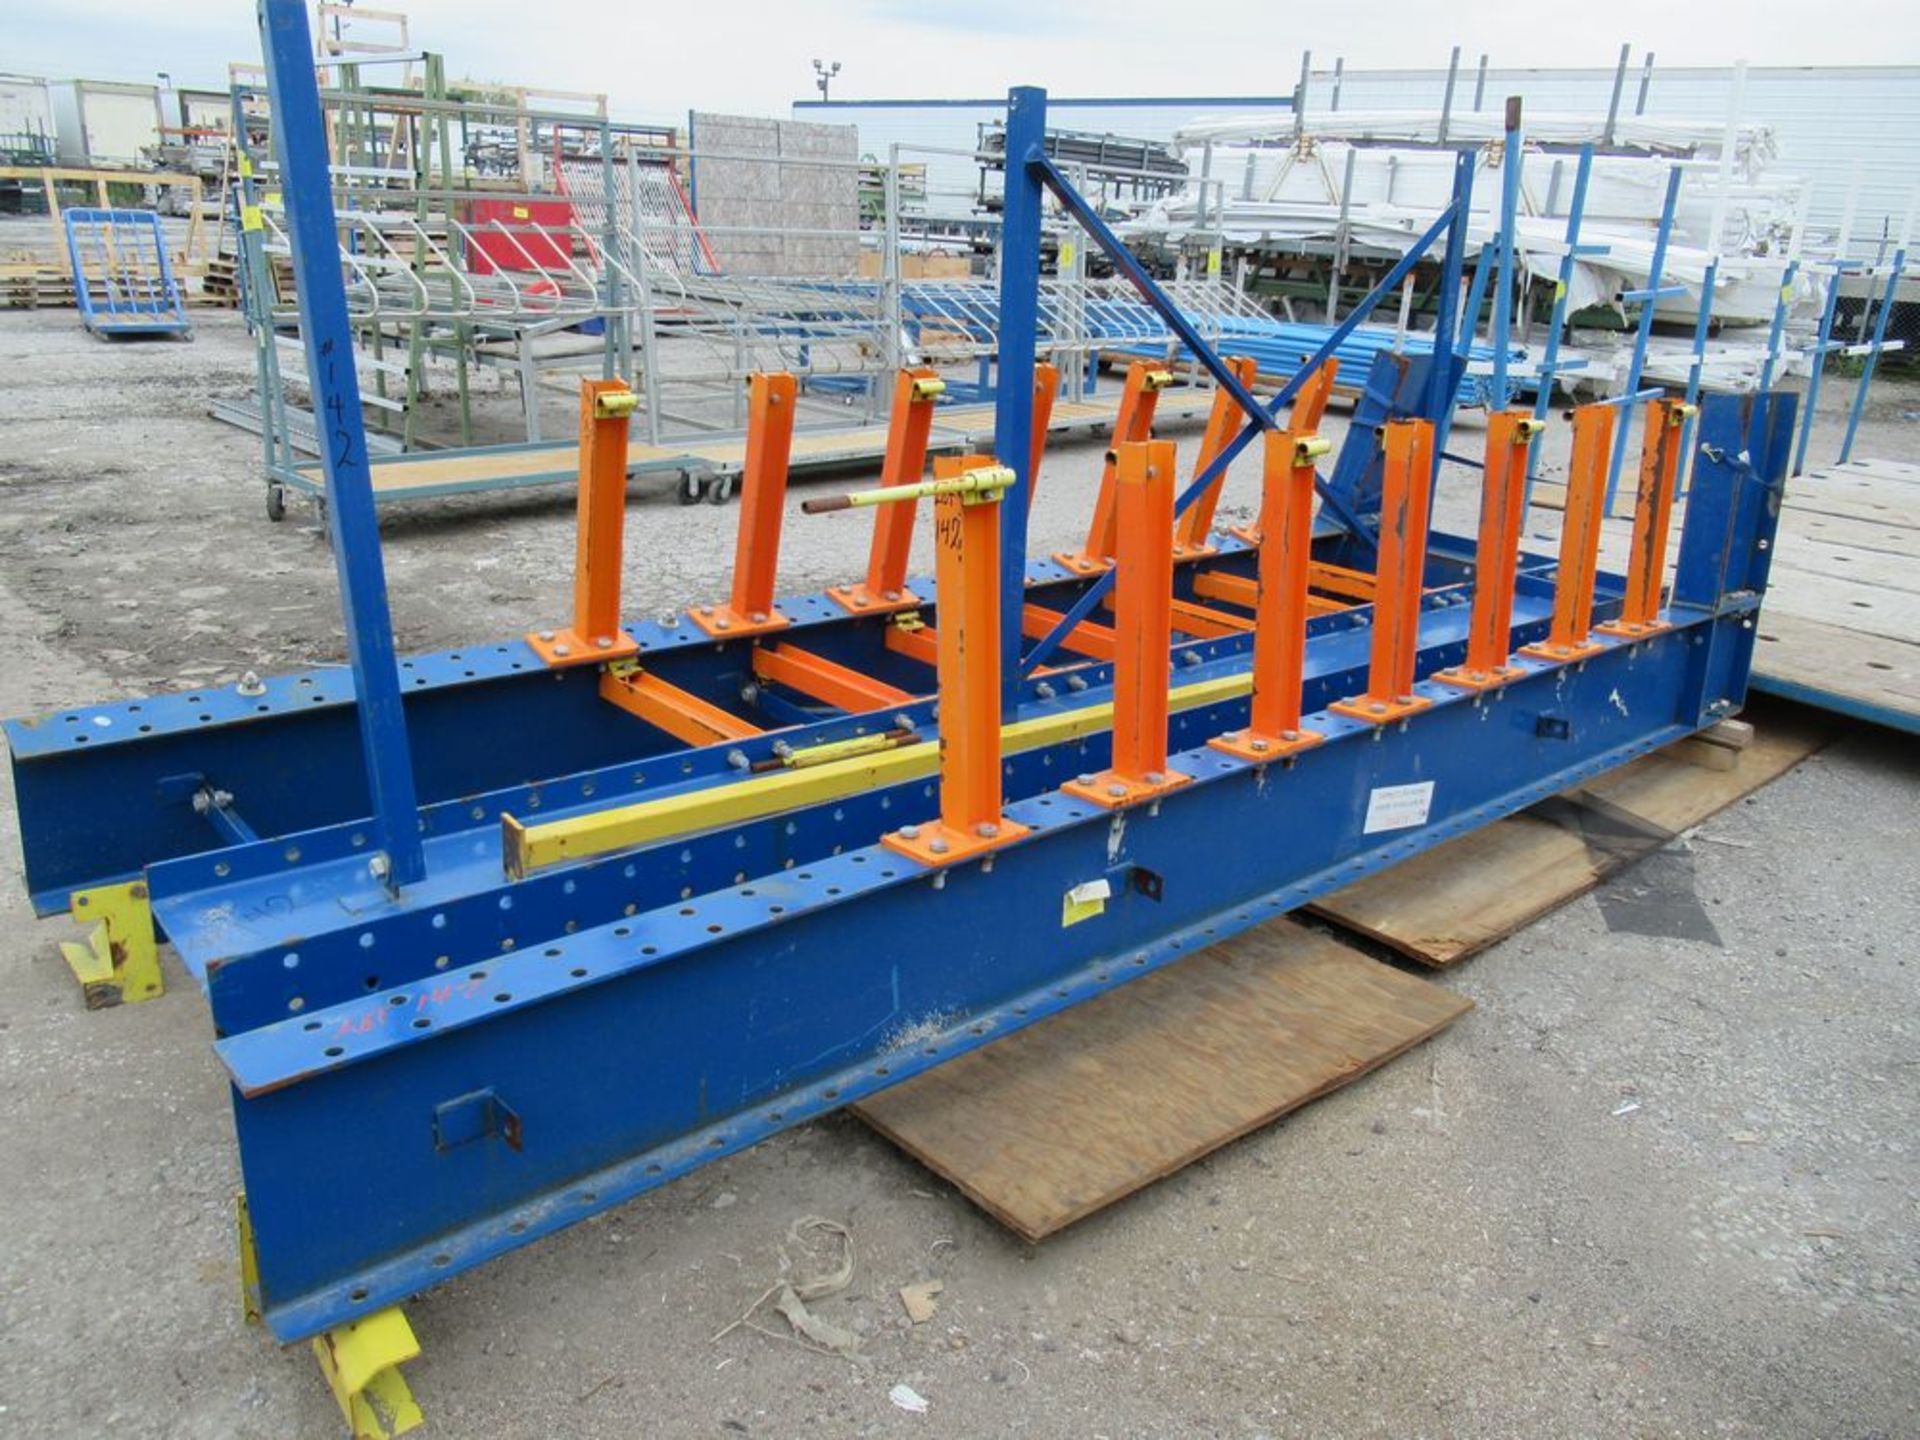 BLUE & ORANGE 9'W X 14'H 2-SECTION 7-TIER CANTILEVER RACK (IN YARD) - Image 4 of 4